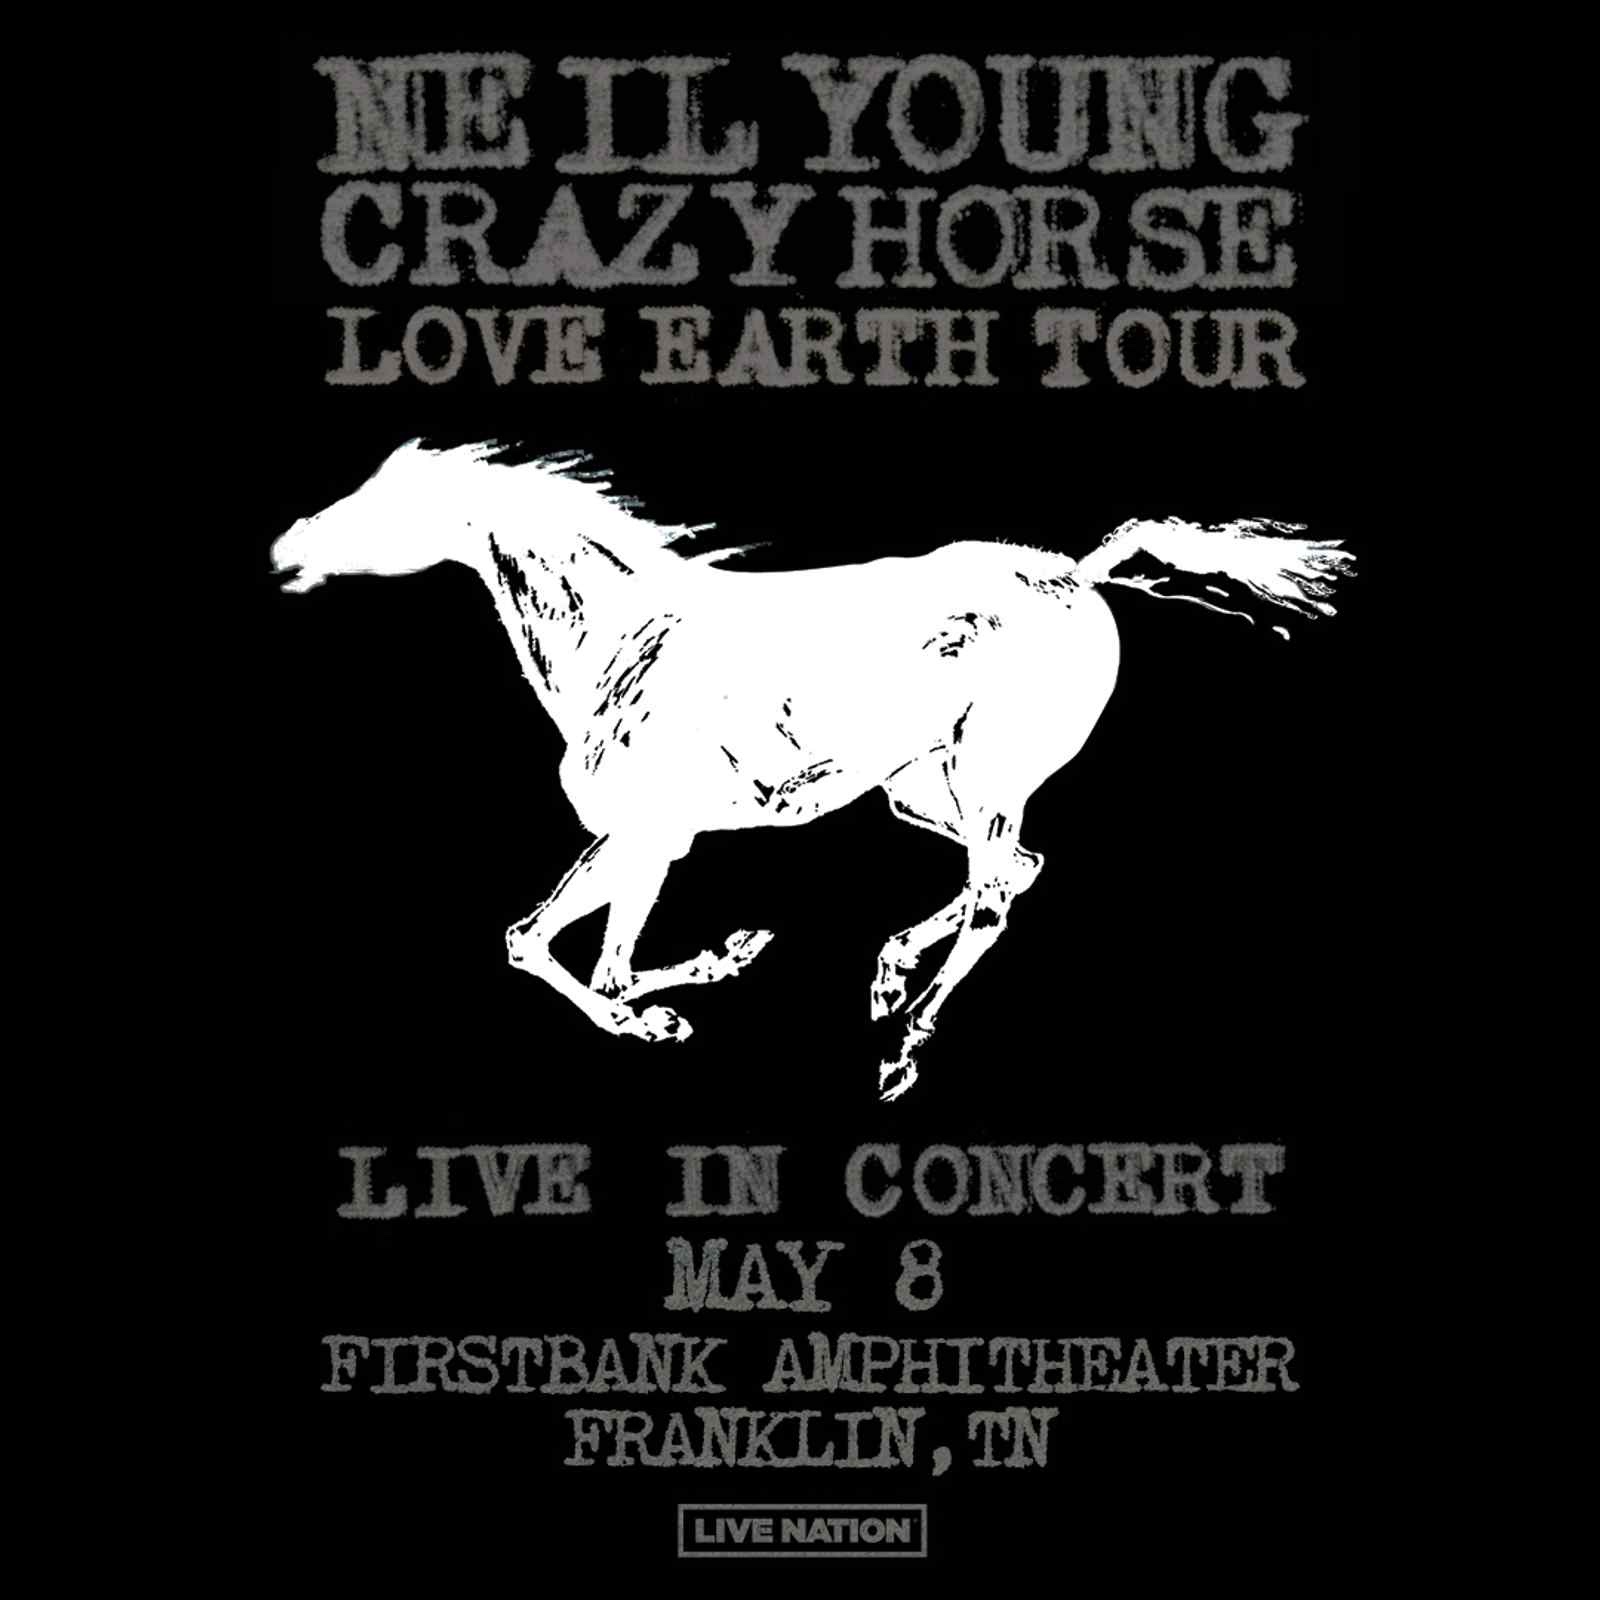 Neil Young & Crazy Horse Love Earth Tour Franklin, Tennessee at FirstBank Amphitheater.